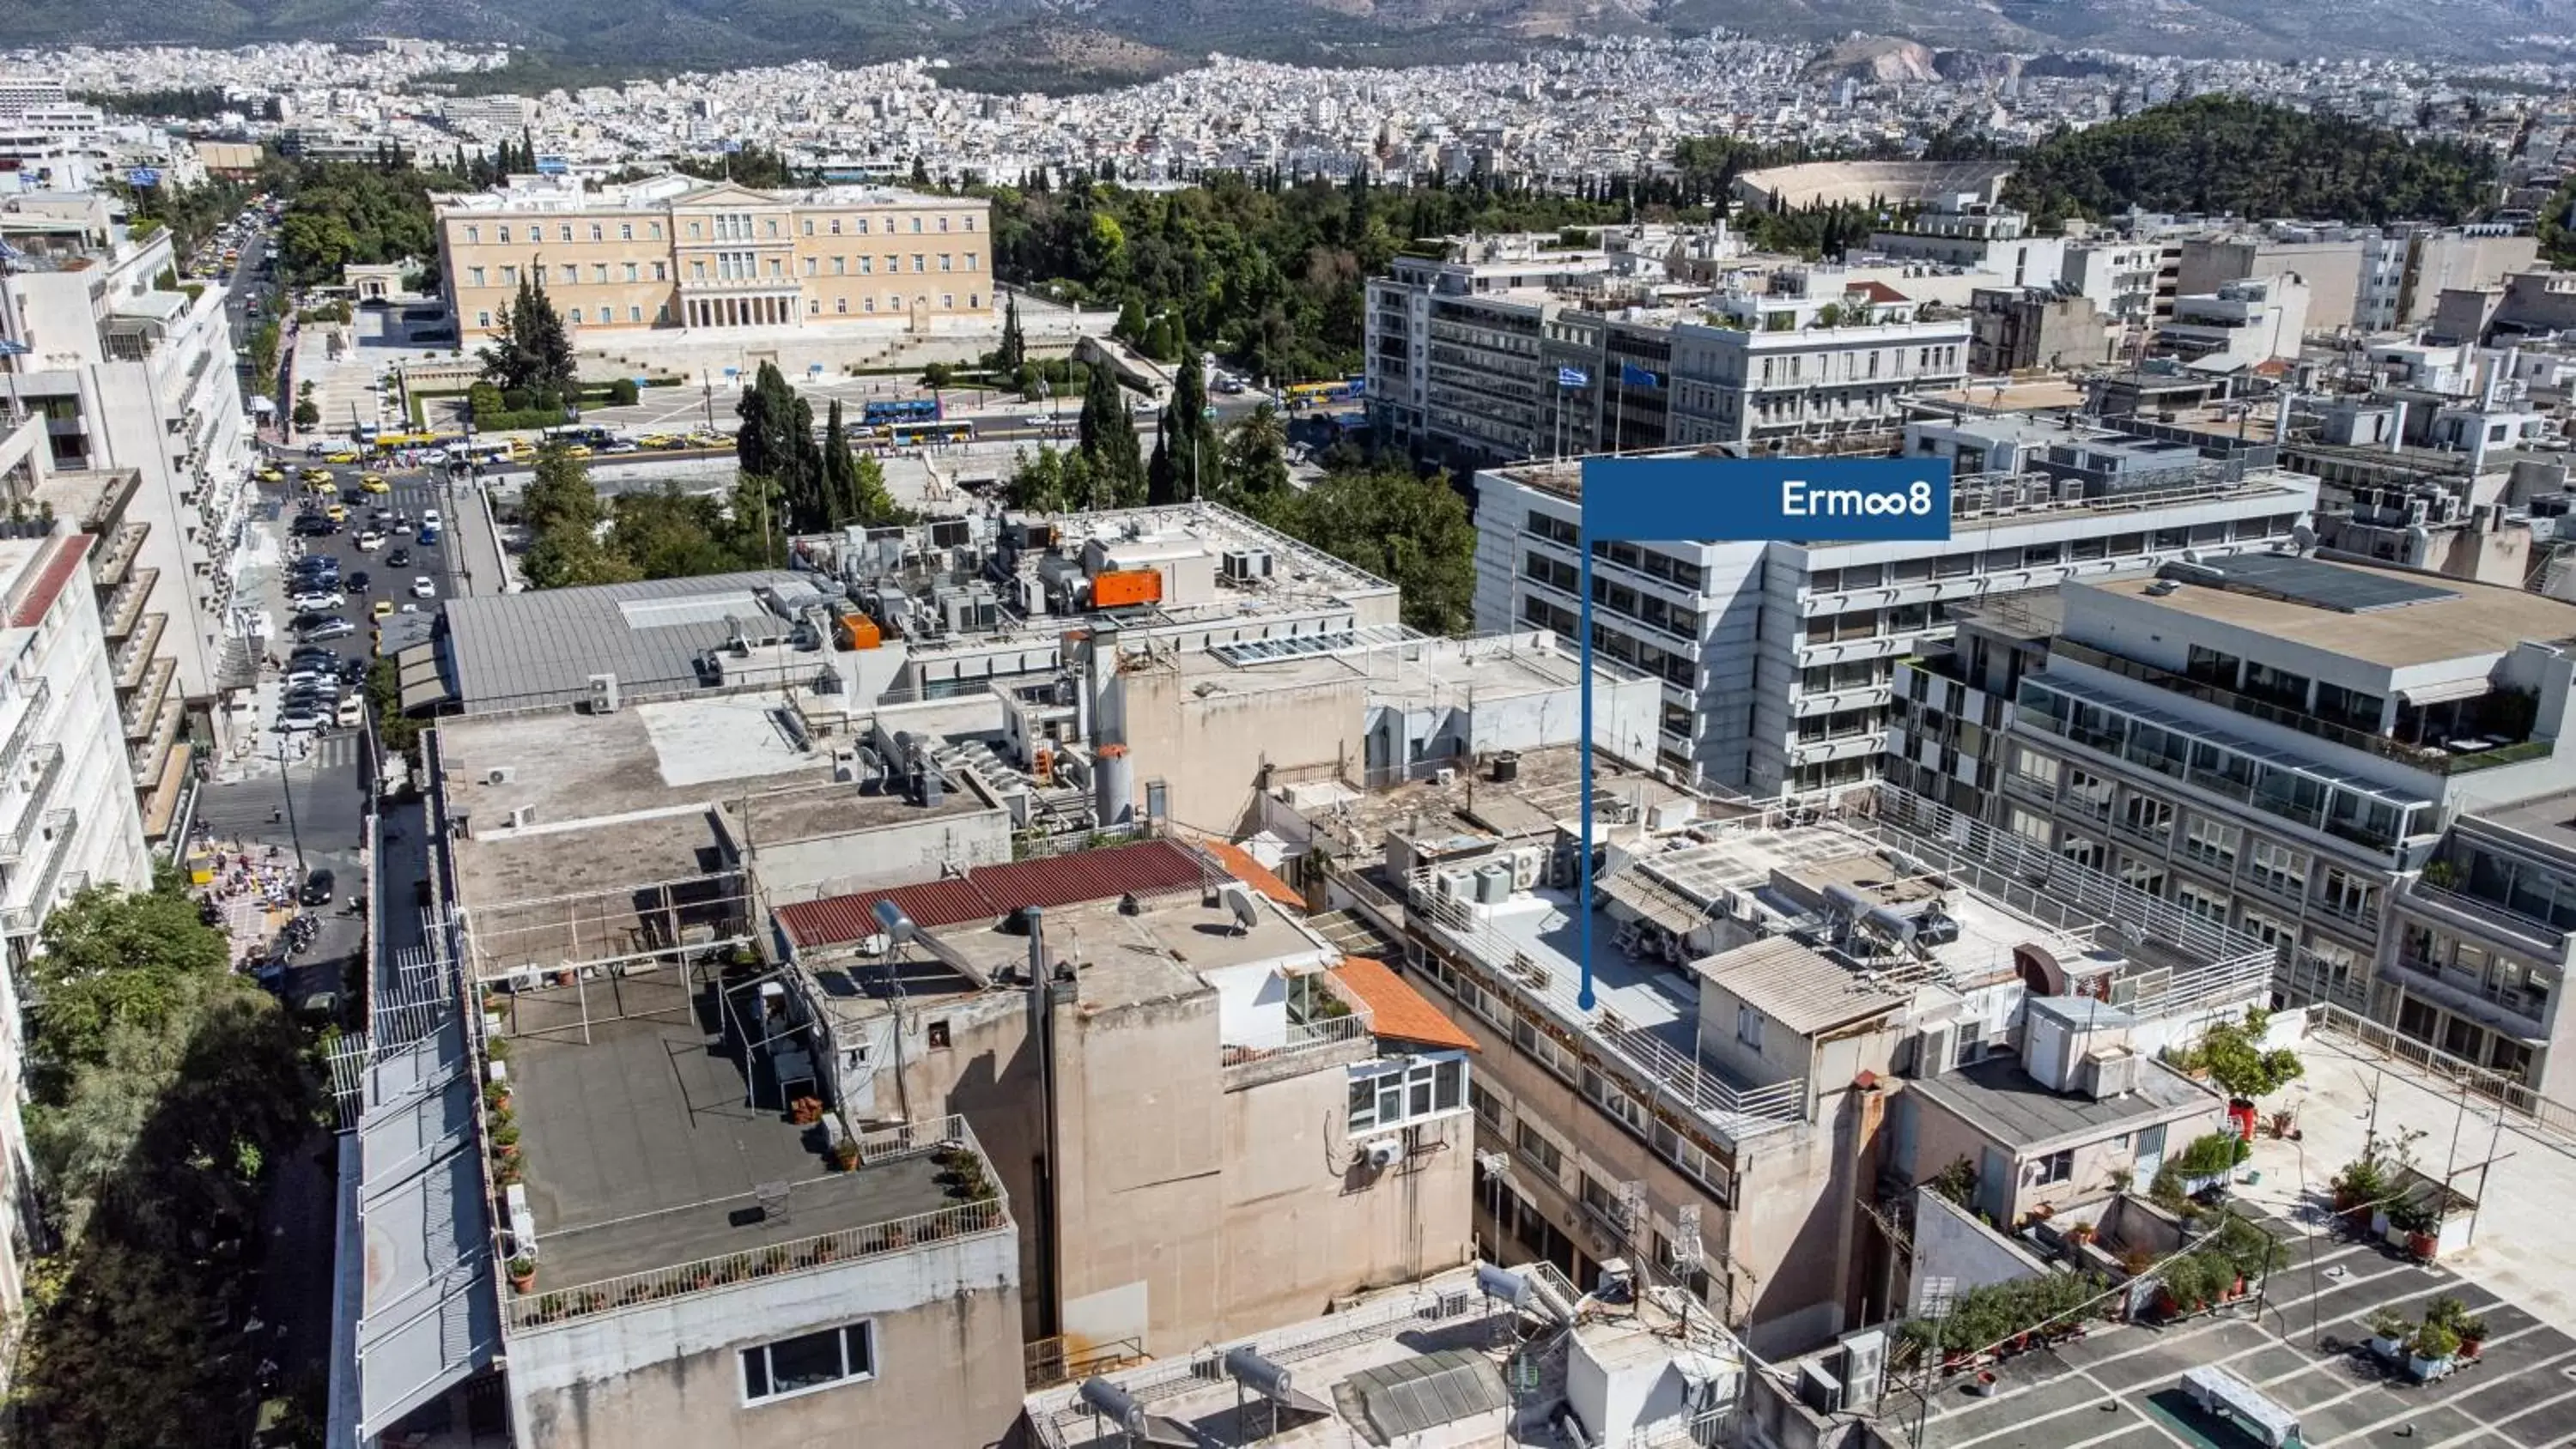 Location, Bird's-eye View in Ermoo Athens Modern Living